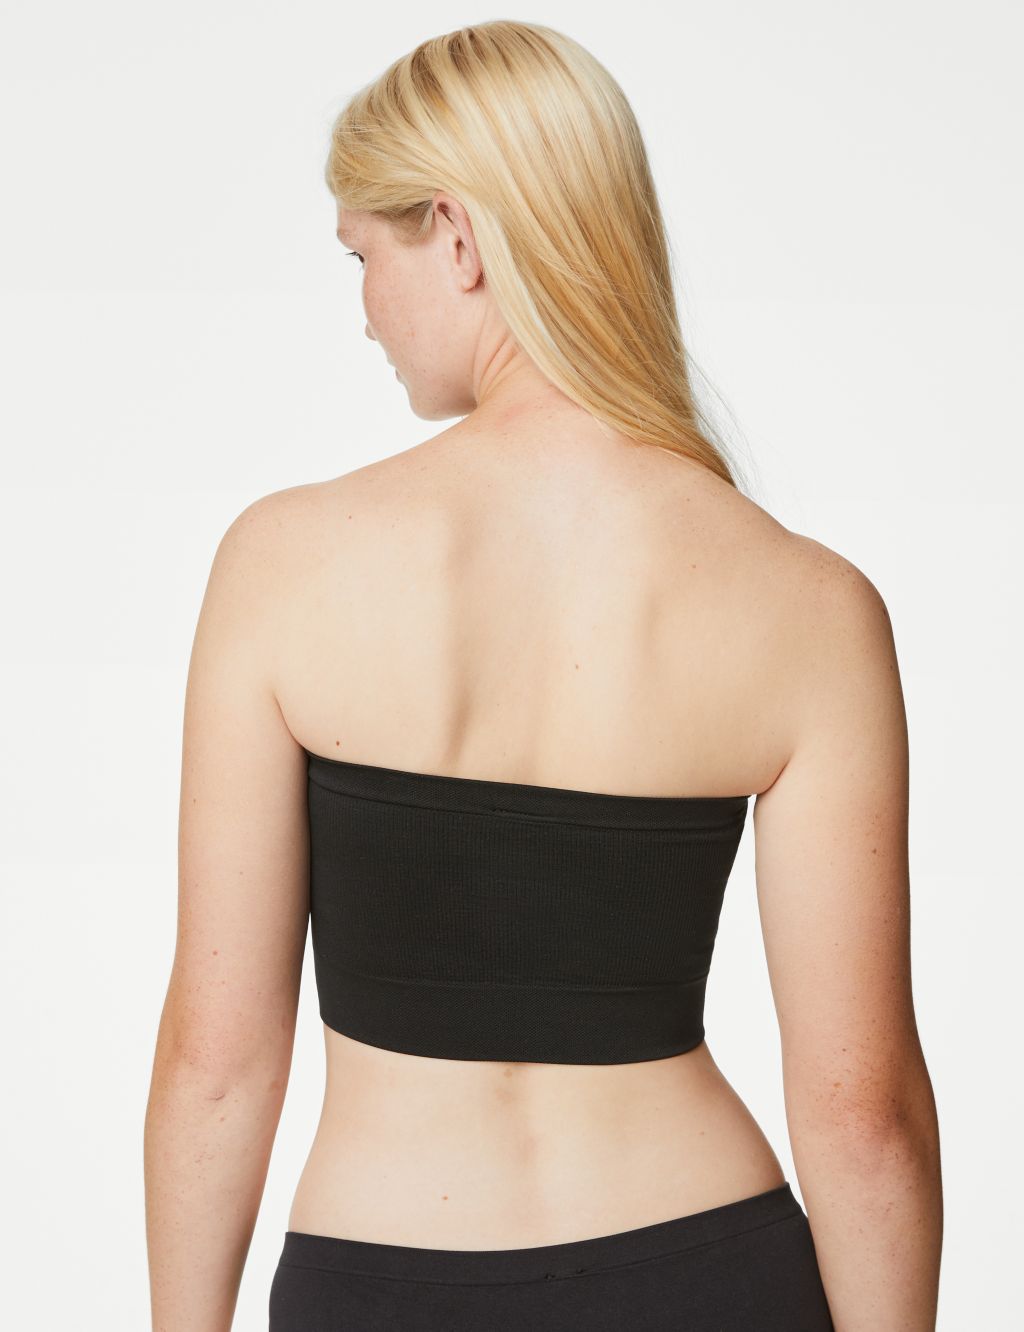 19.1% OFF on Marks & Spencer Women Bra Non-wired Seamless Bandeau